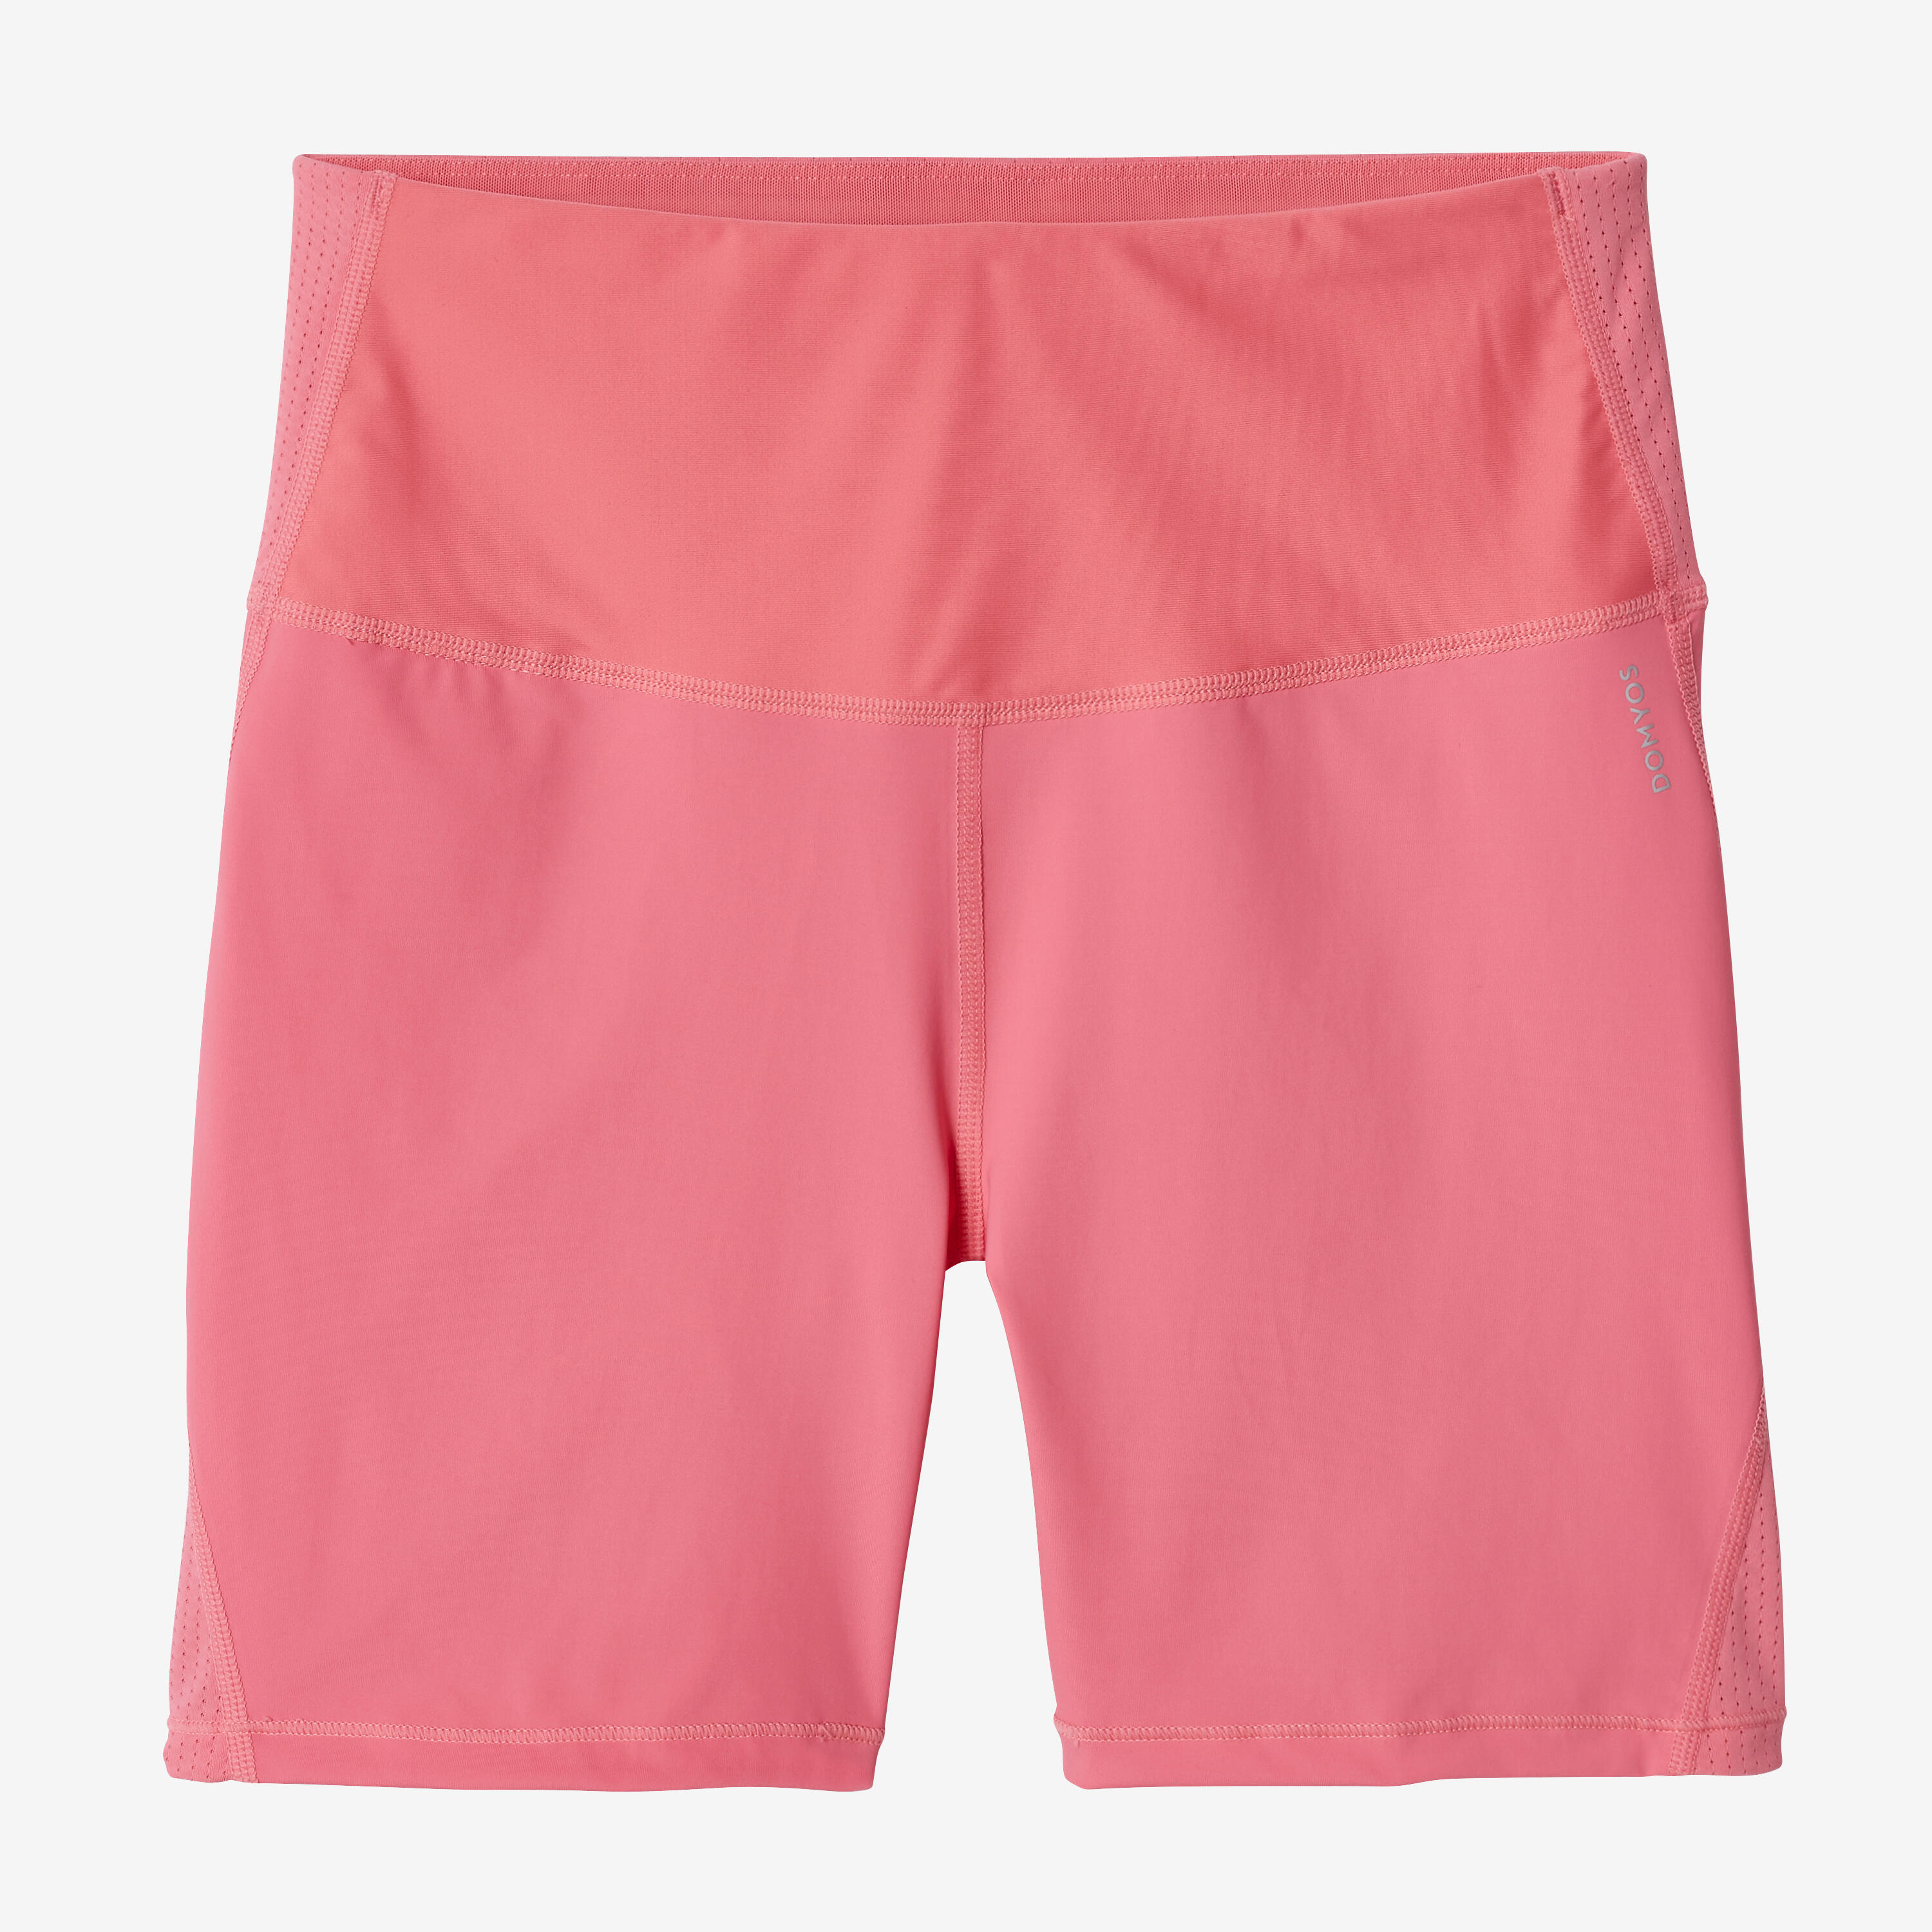 Women's Cardio Fitness High-Waisted Shaping Shorts - Pink 8/10